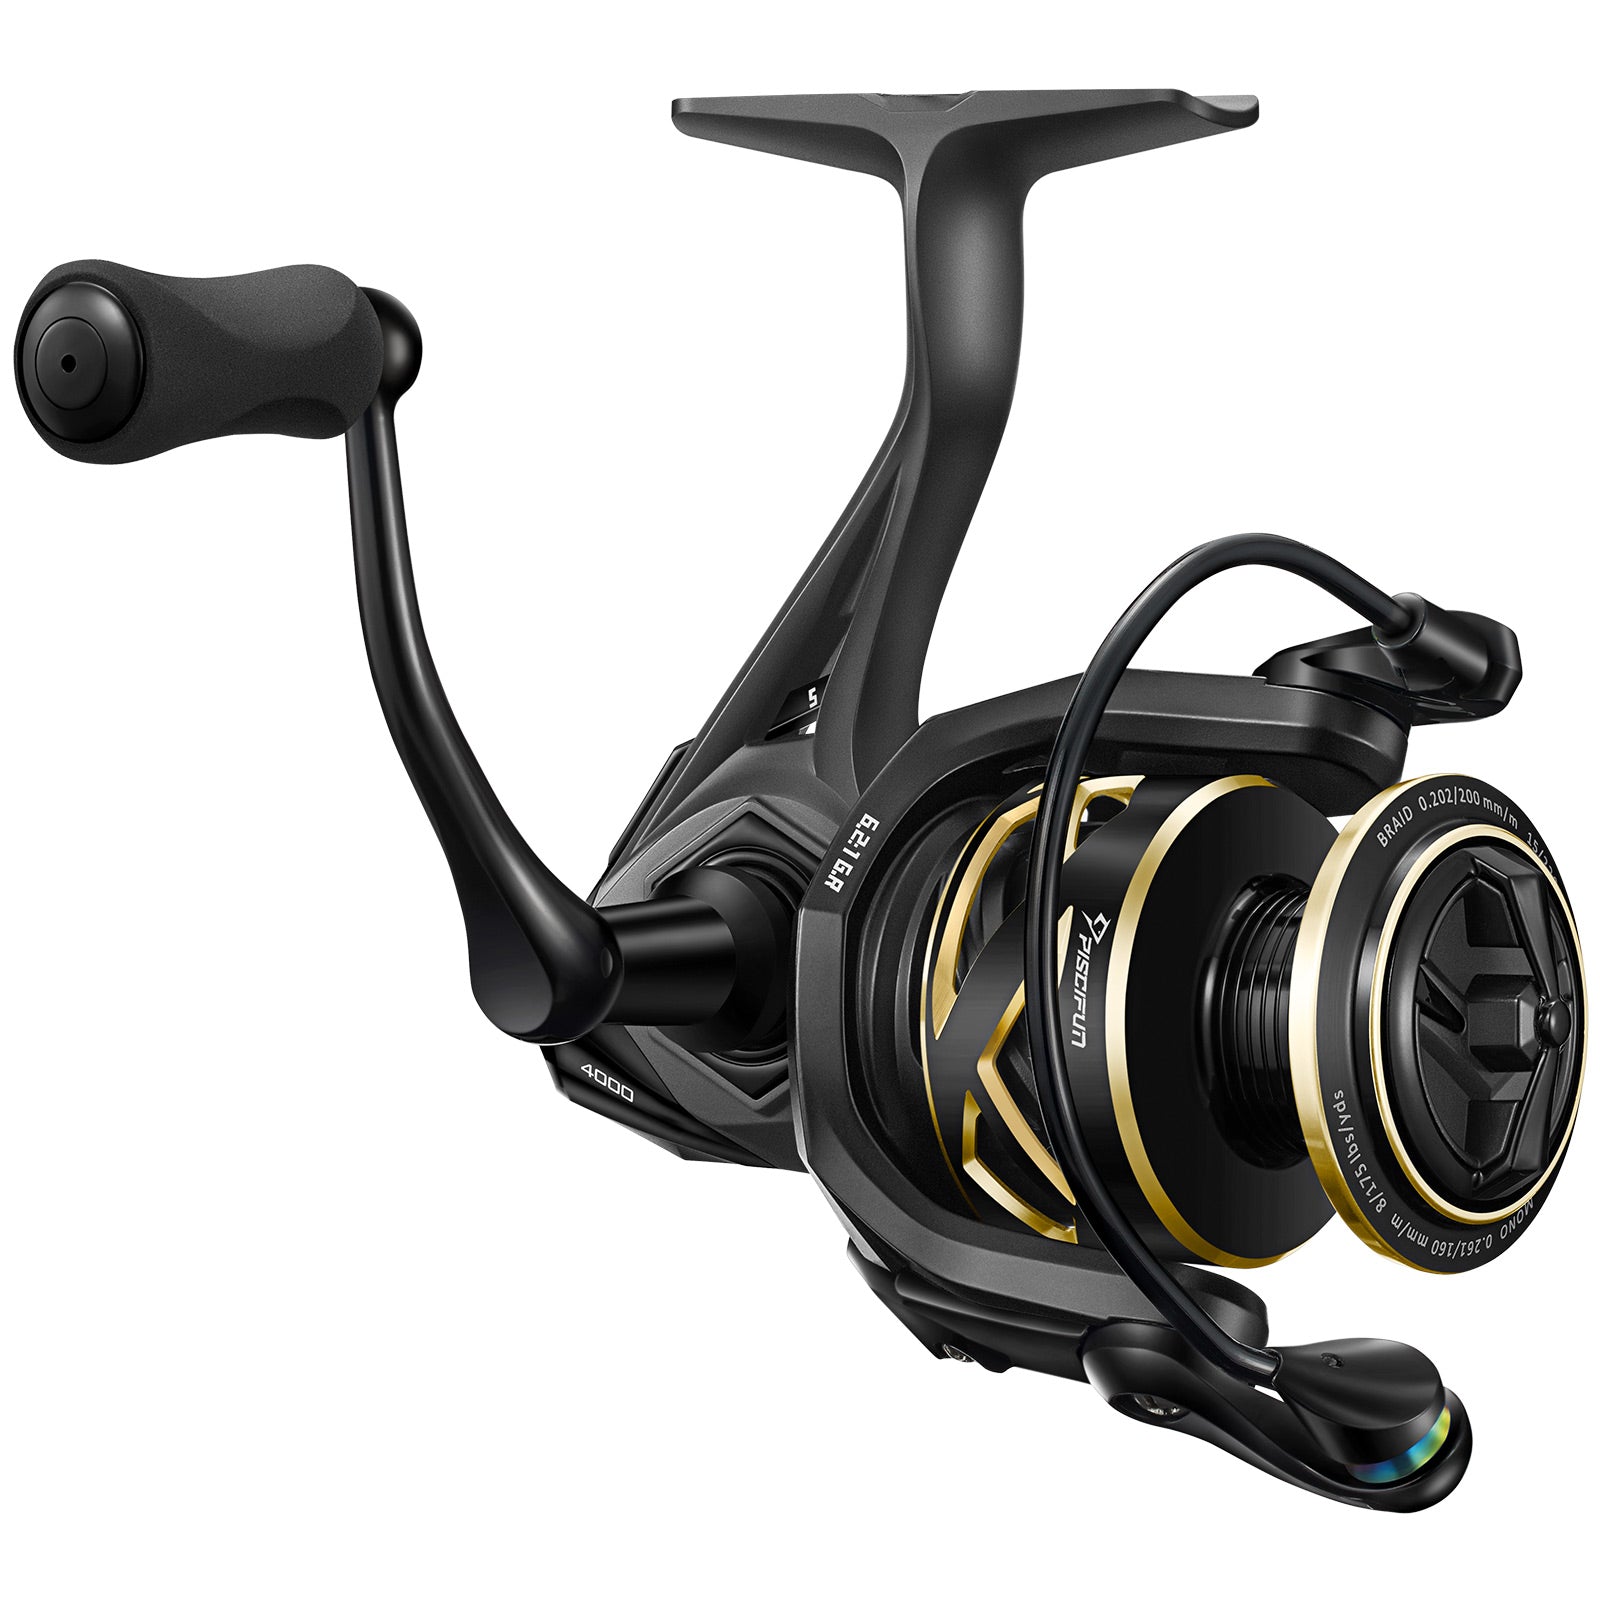 Piscifun® Auric Spinning Reels - Saltwater and Freshwater Spinning Fis